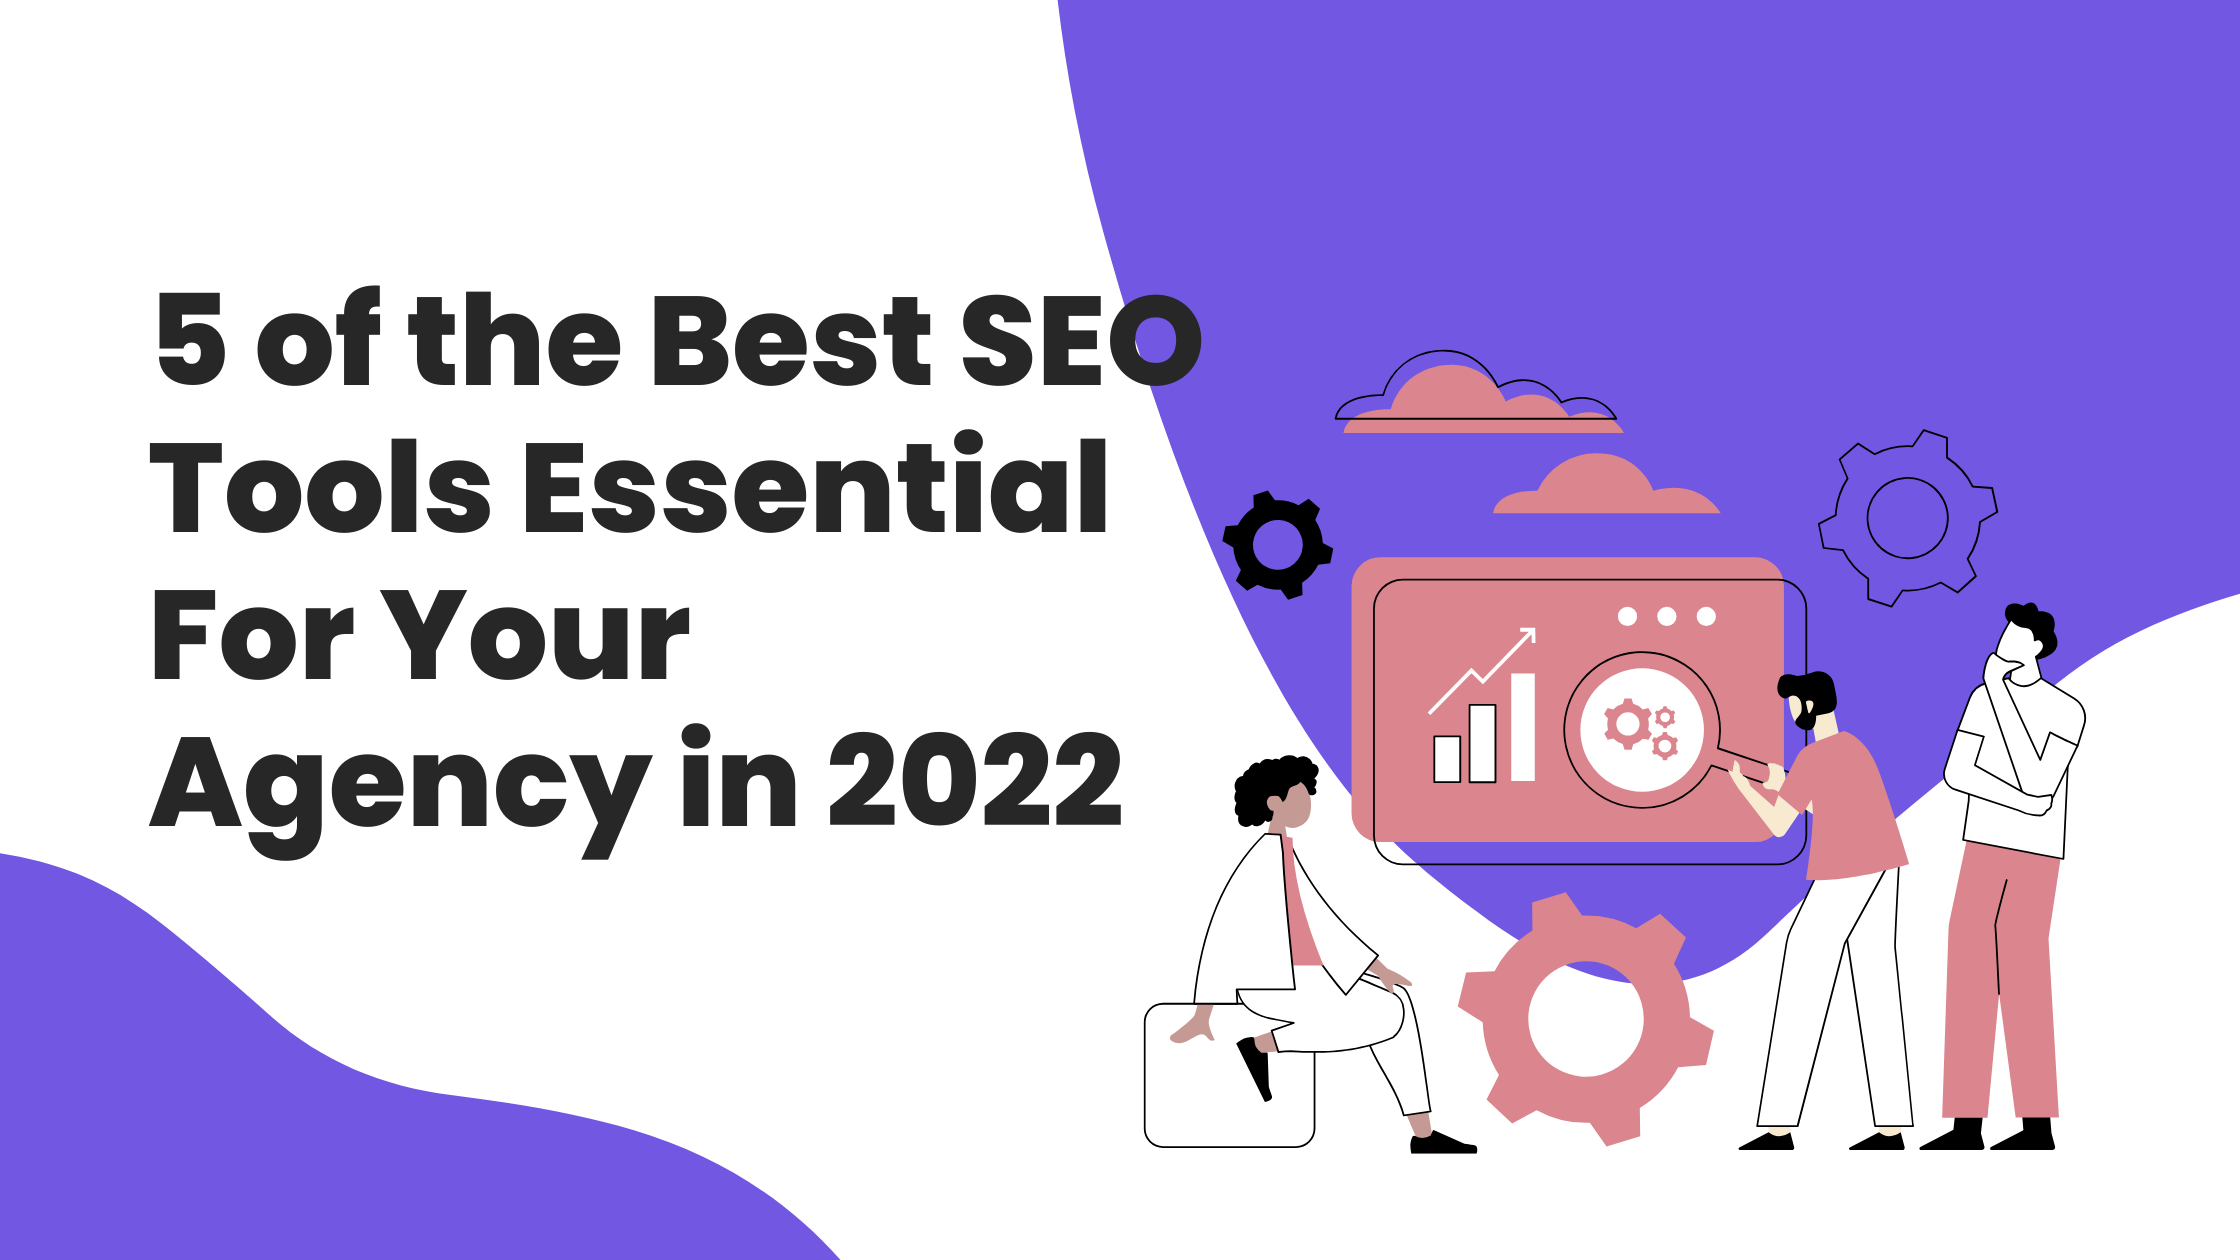 5 of the Best SEO Tools Essential For Your Agency in 2022